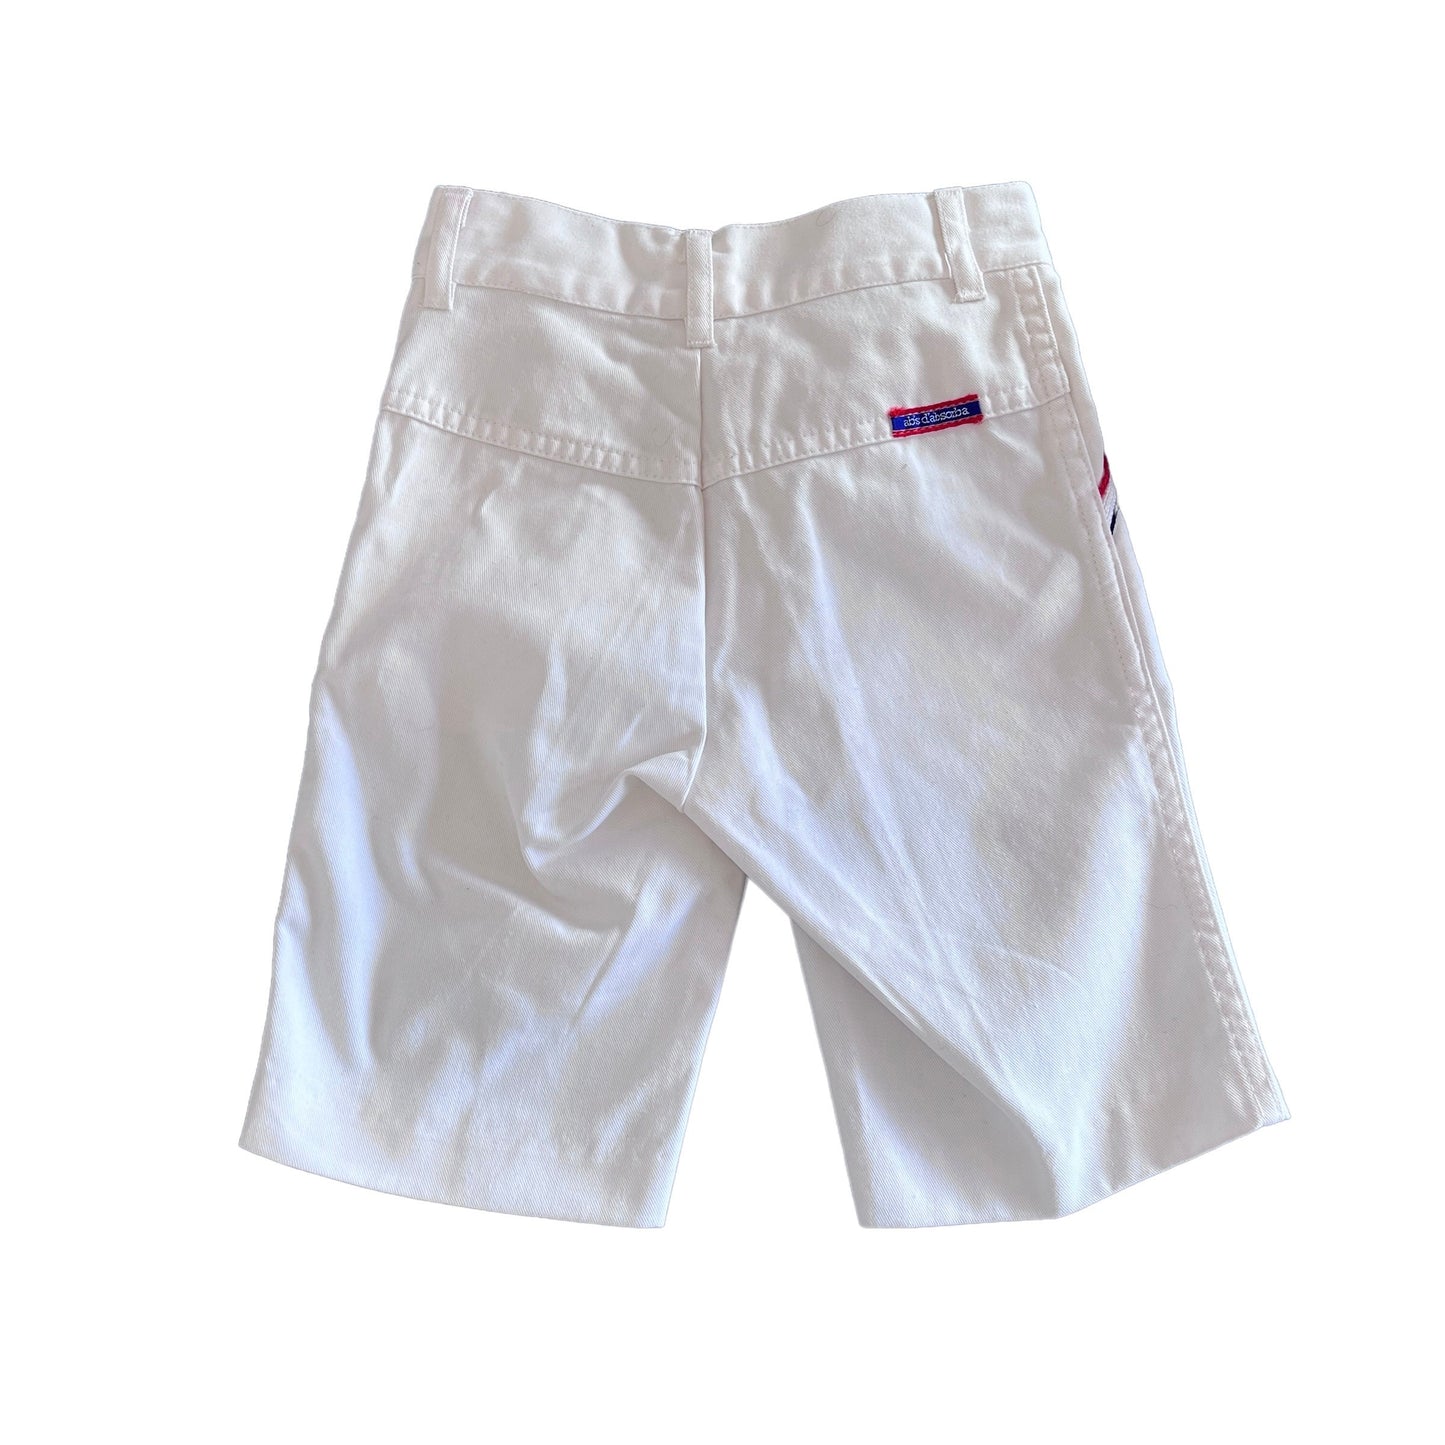 Vintage 1970's White Shorts 4-5 Years